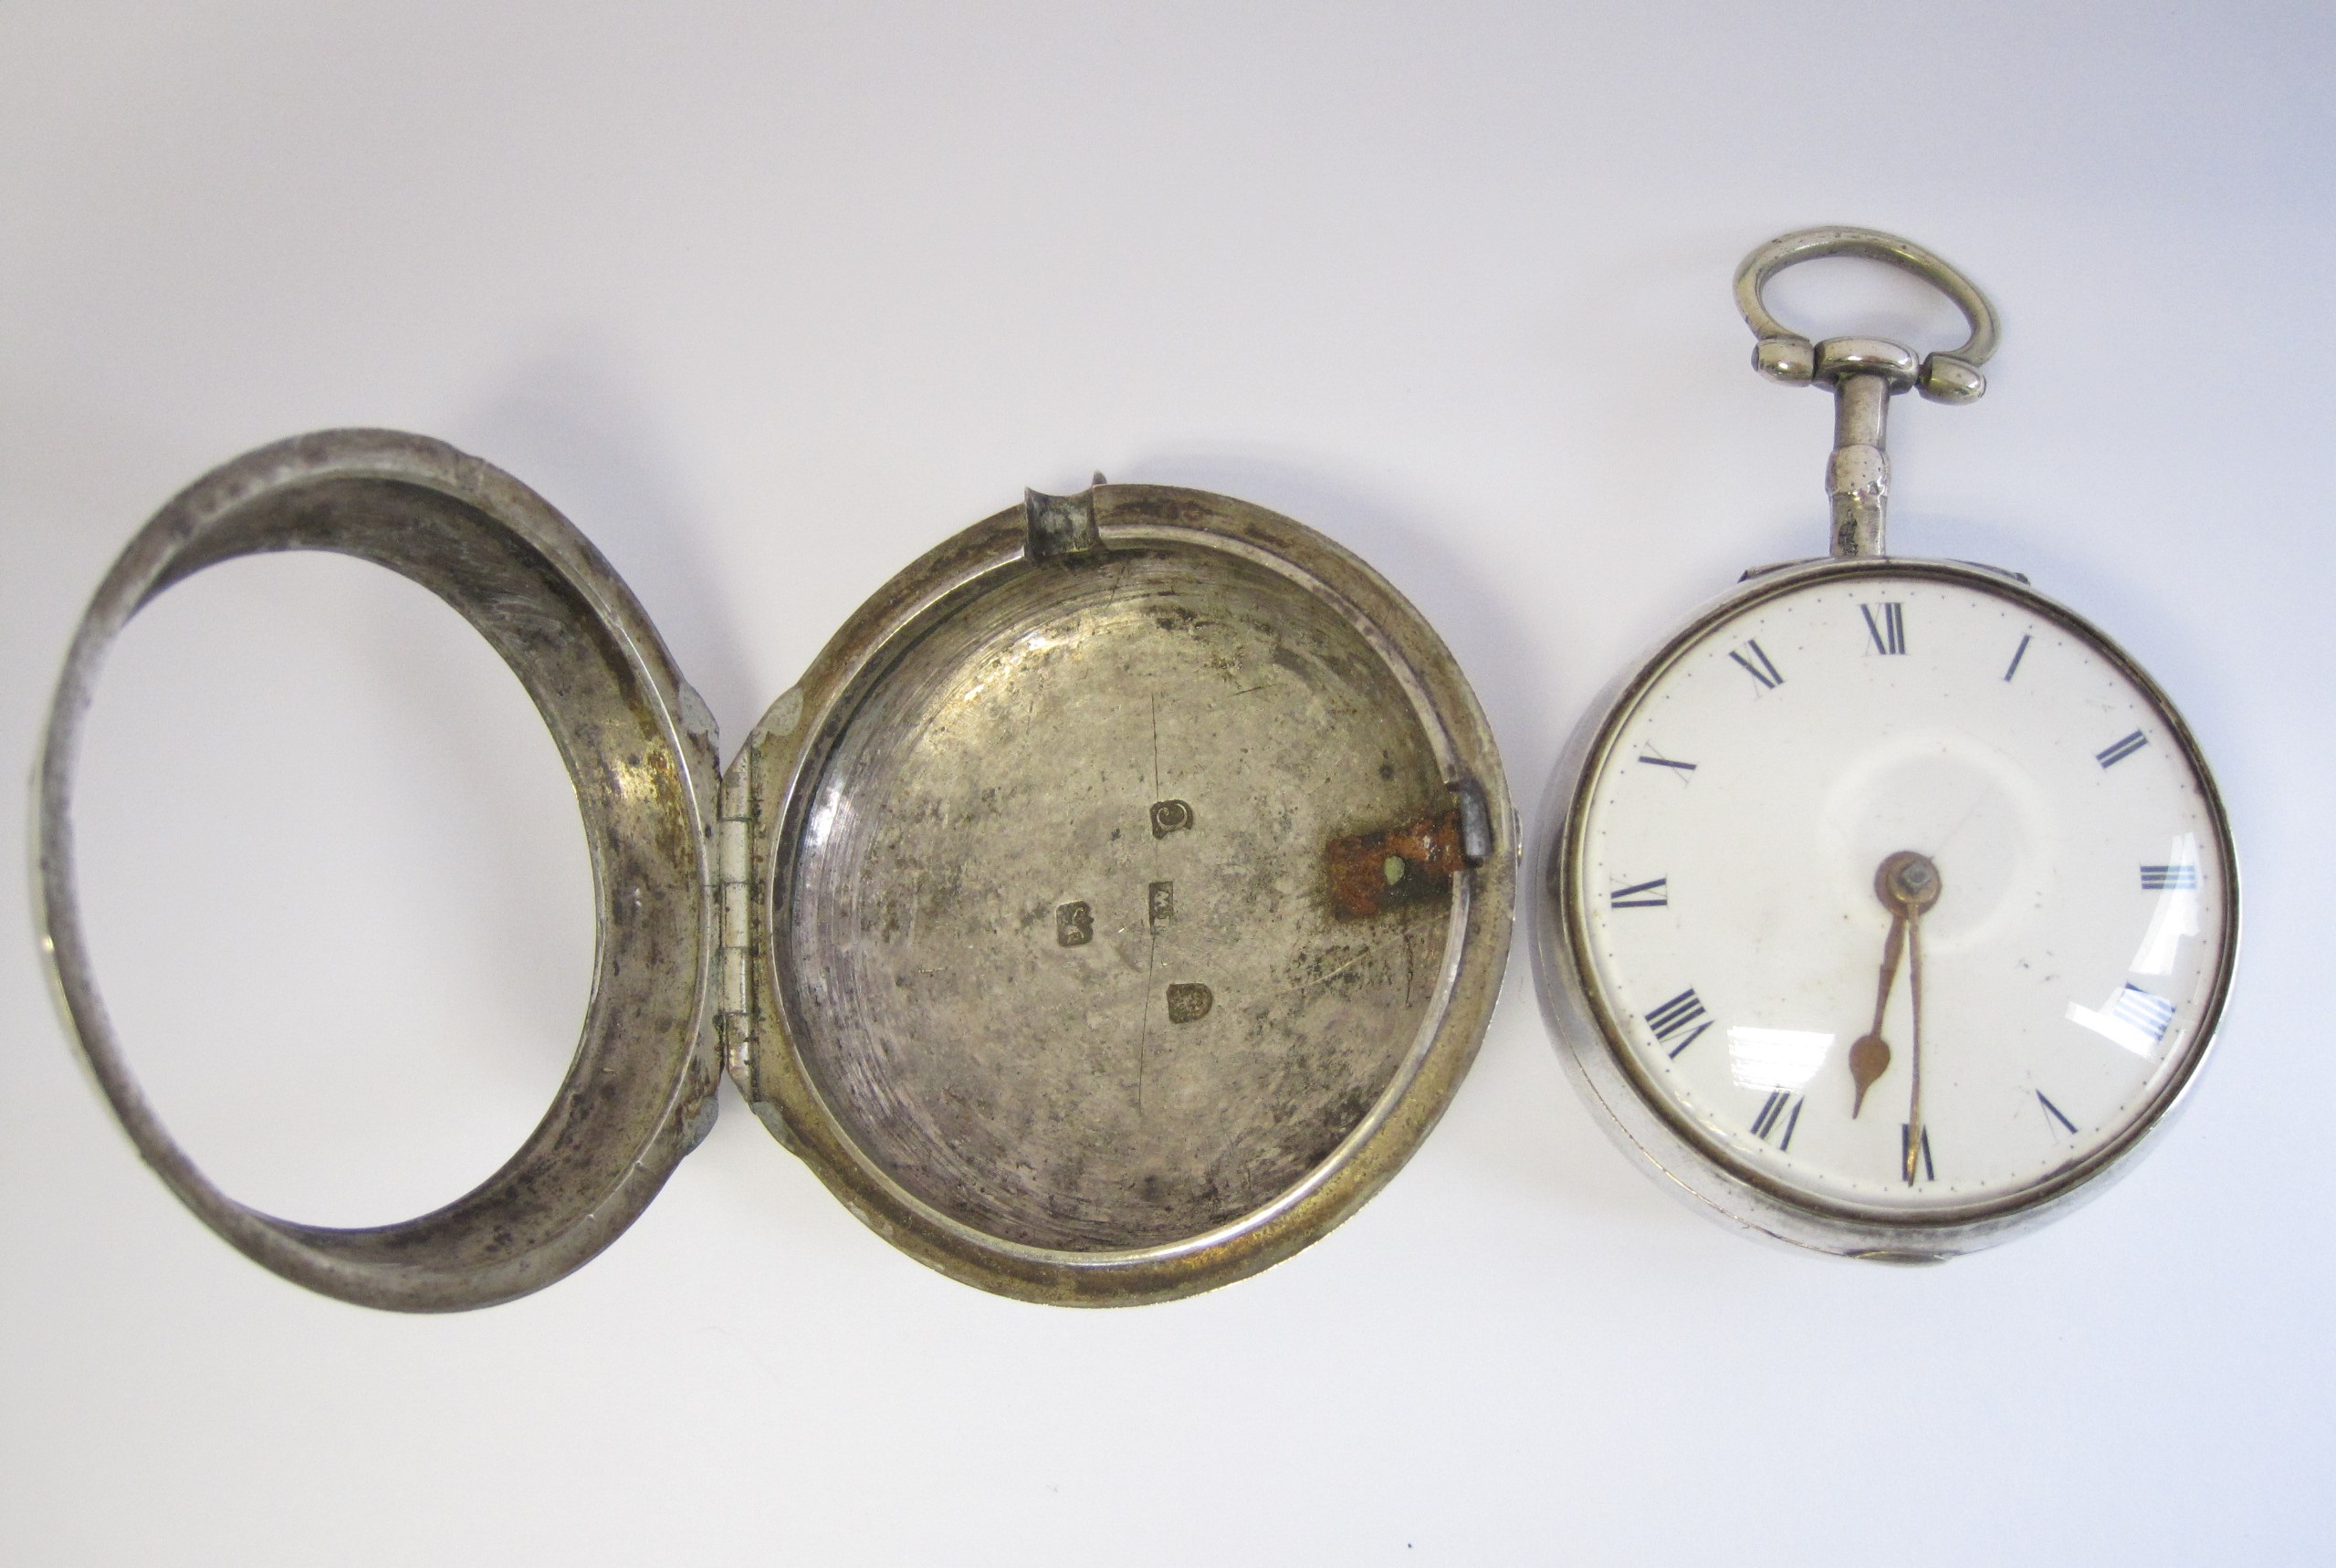 A George III silver pair cased Verge Pocket Watch inscribed Jn Champion, London, No. 8820 - Image 2 of 7